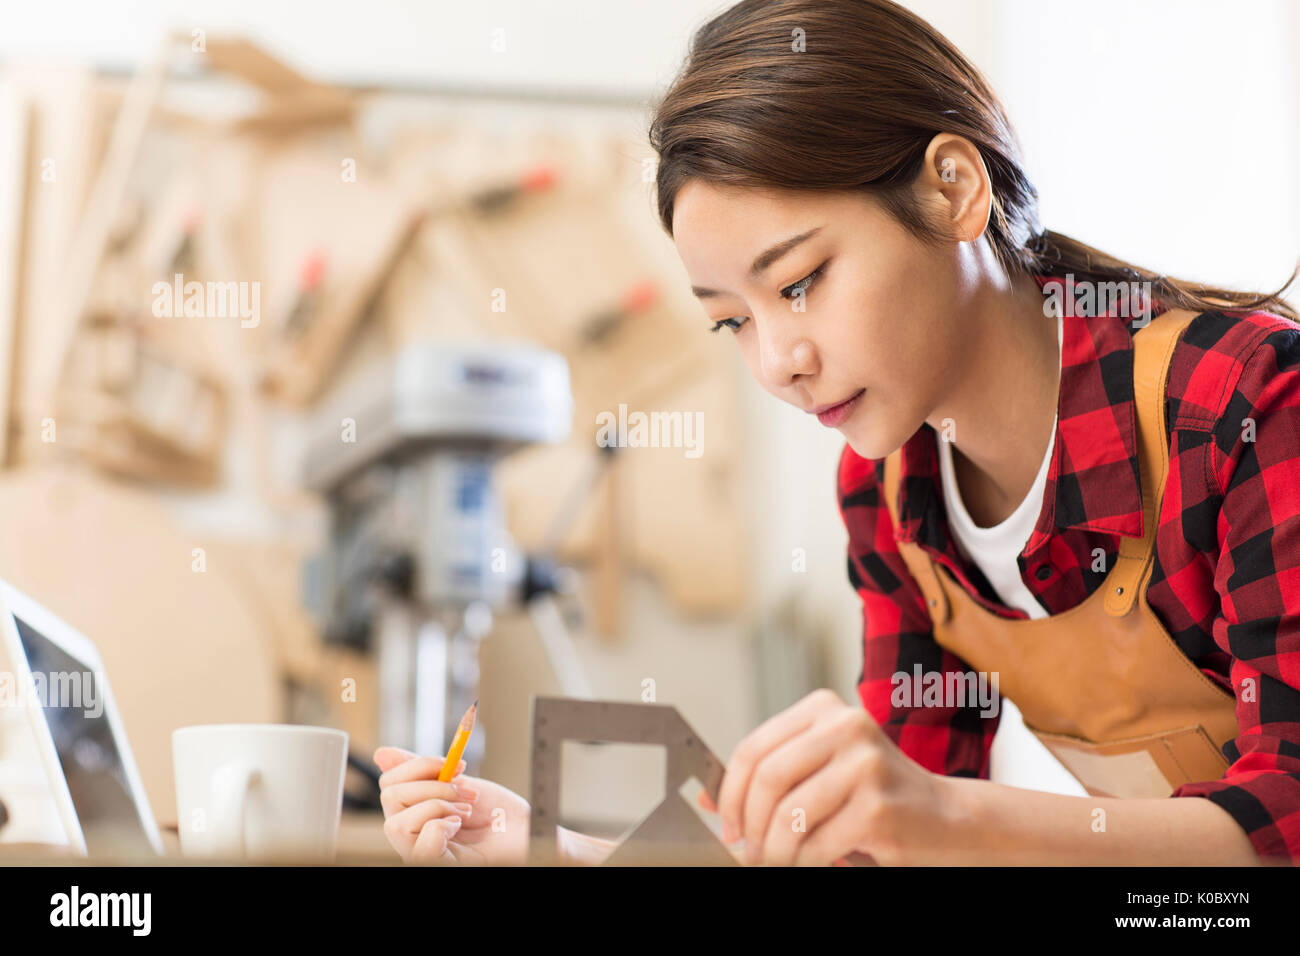 Side view portrait of young female furniture designer concentrating on her work Stock Photo